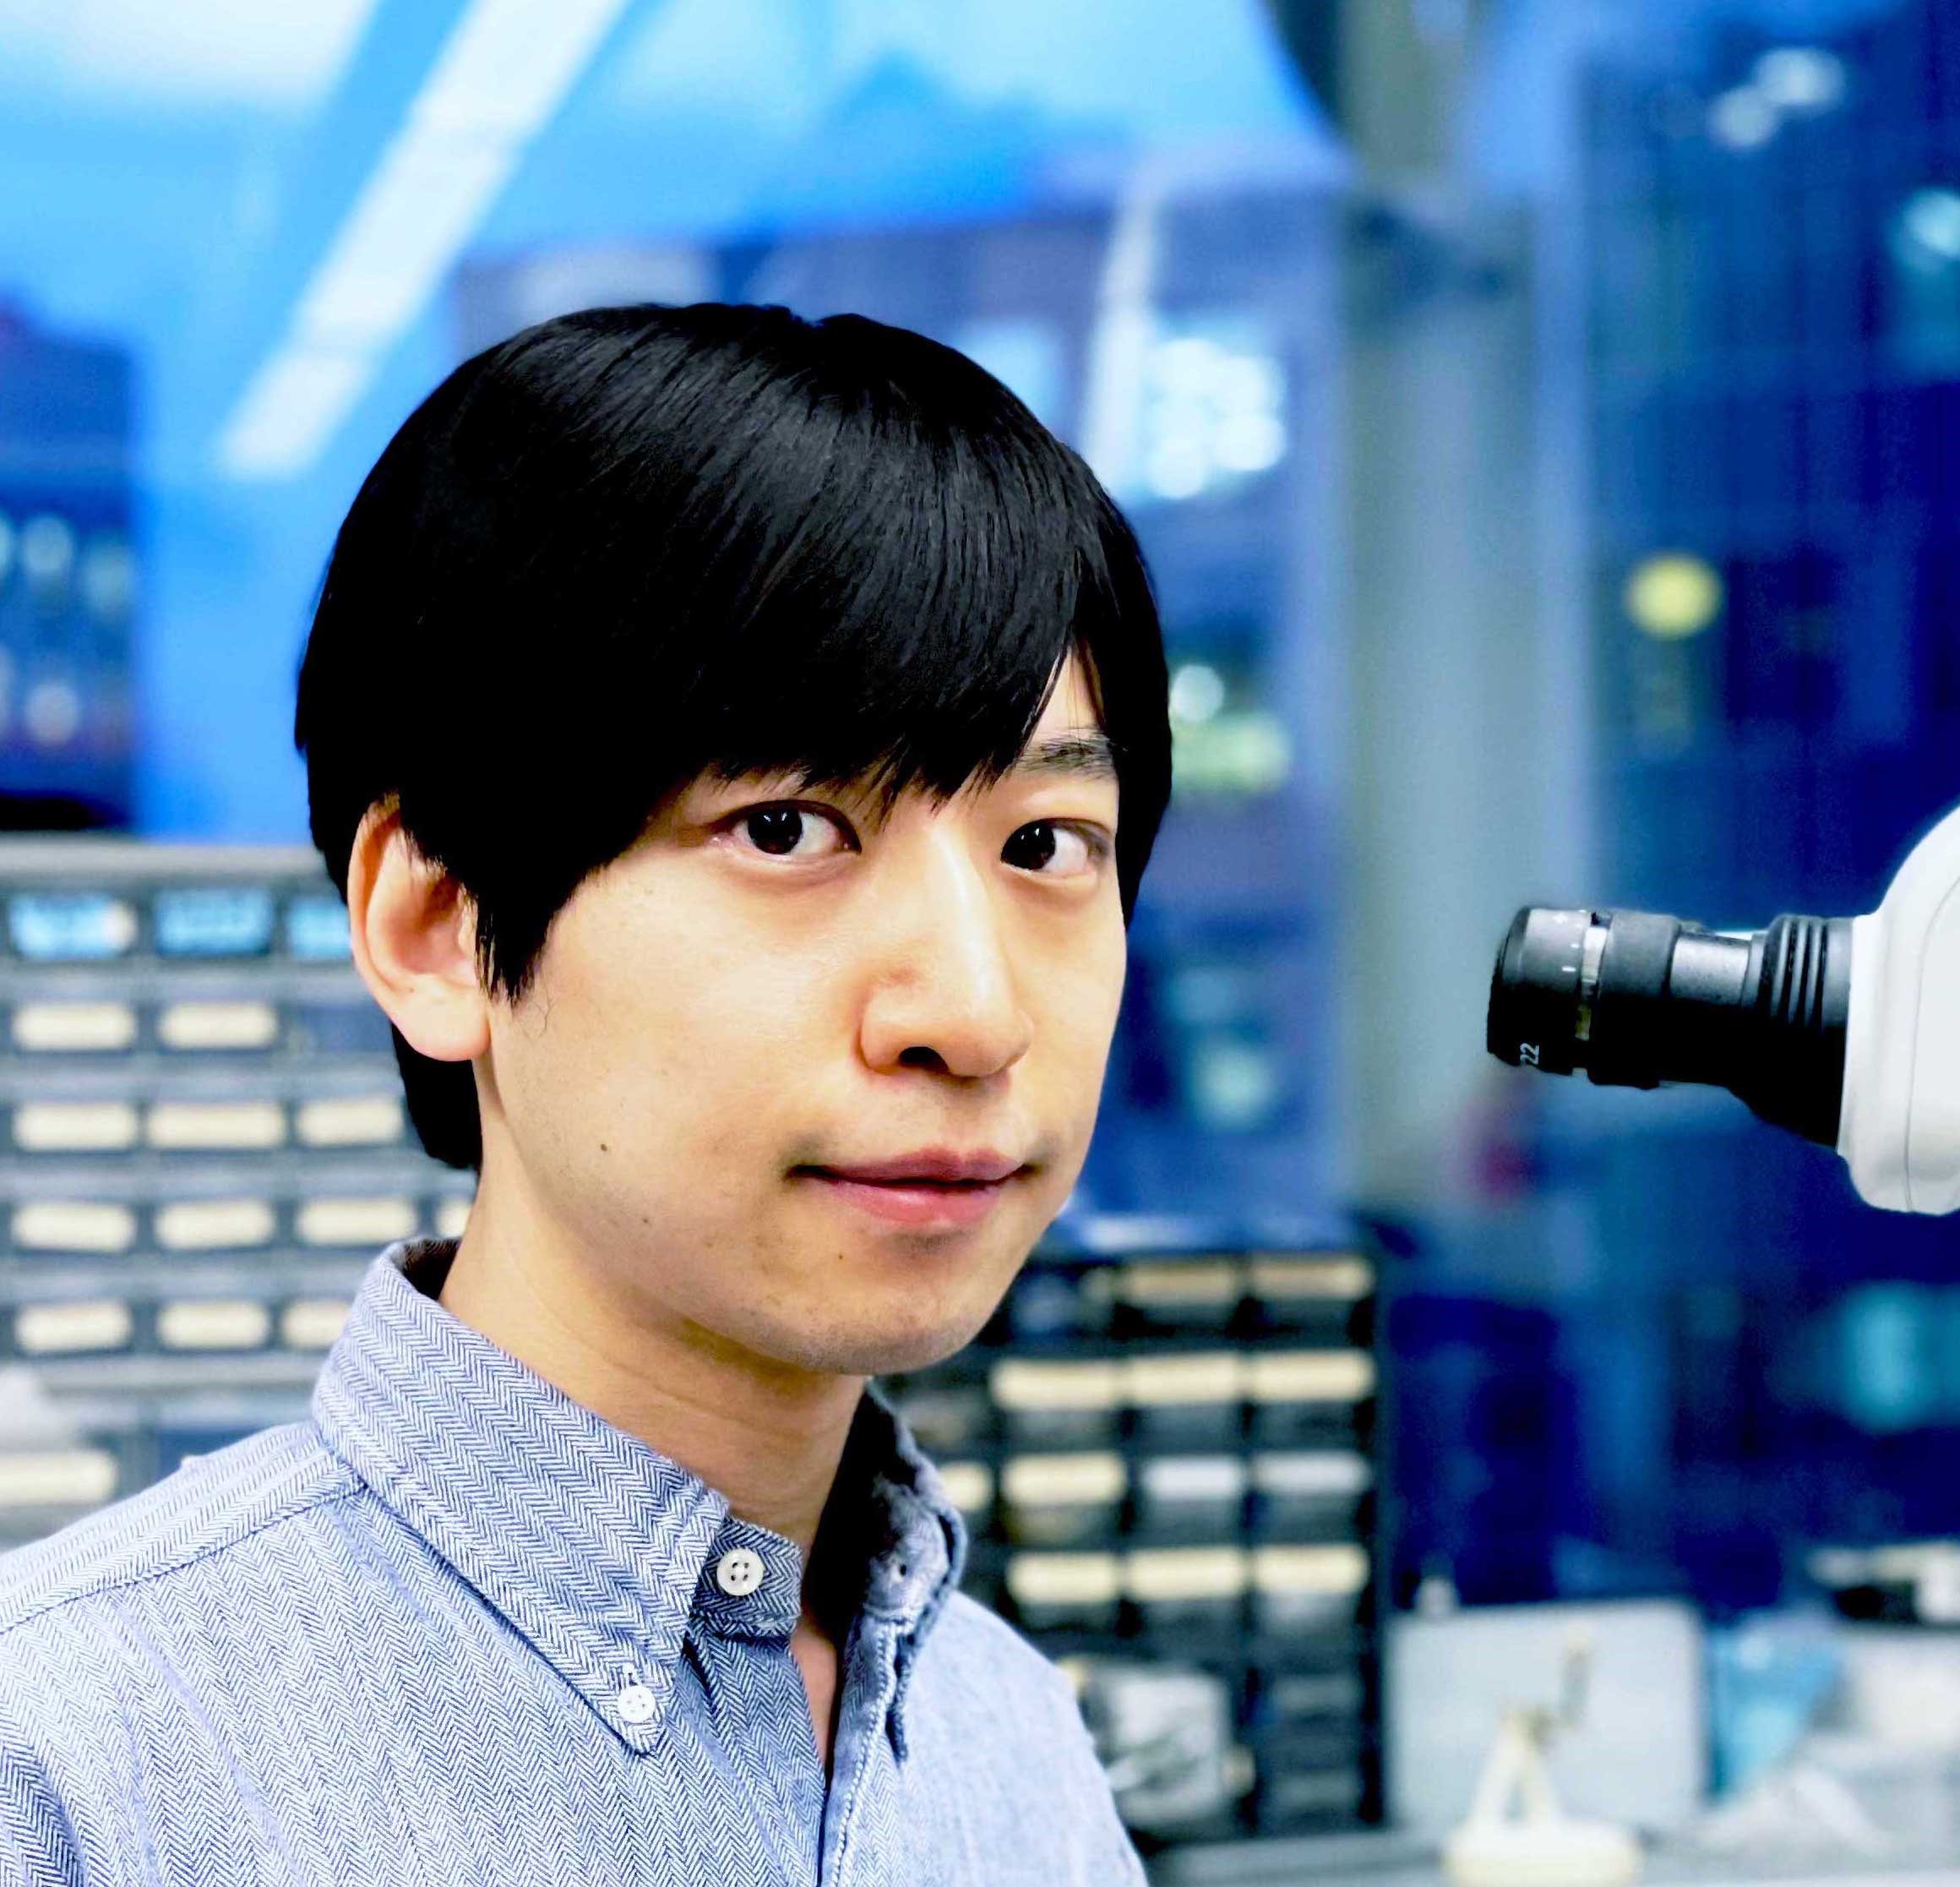 Takato Honda sits at the lab bench next to a microscope